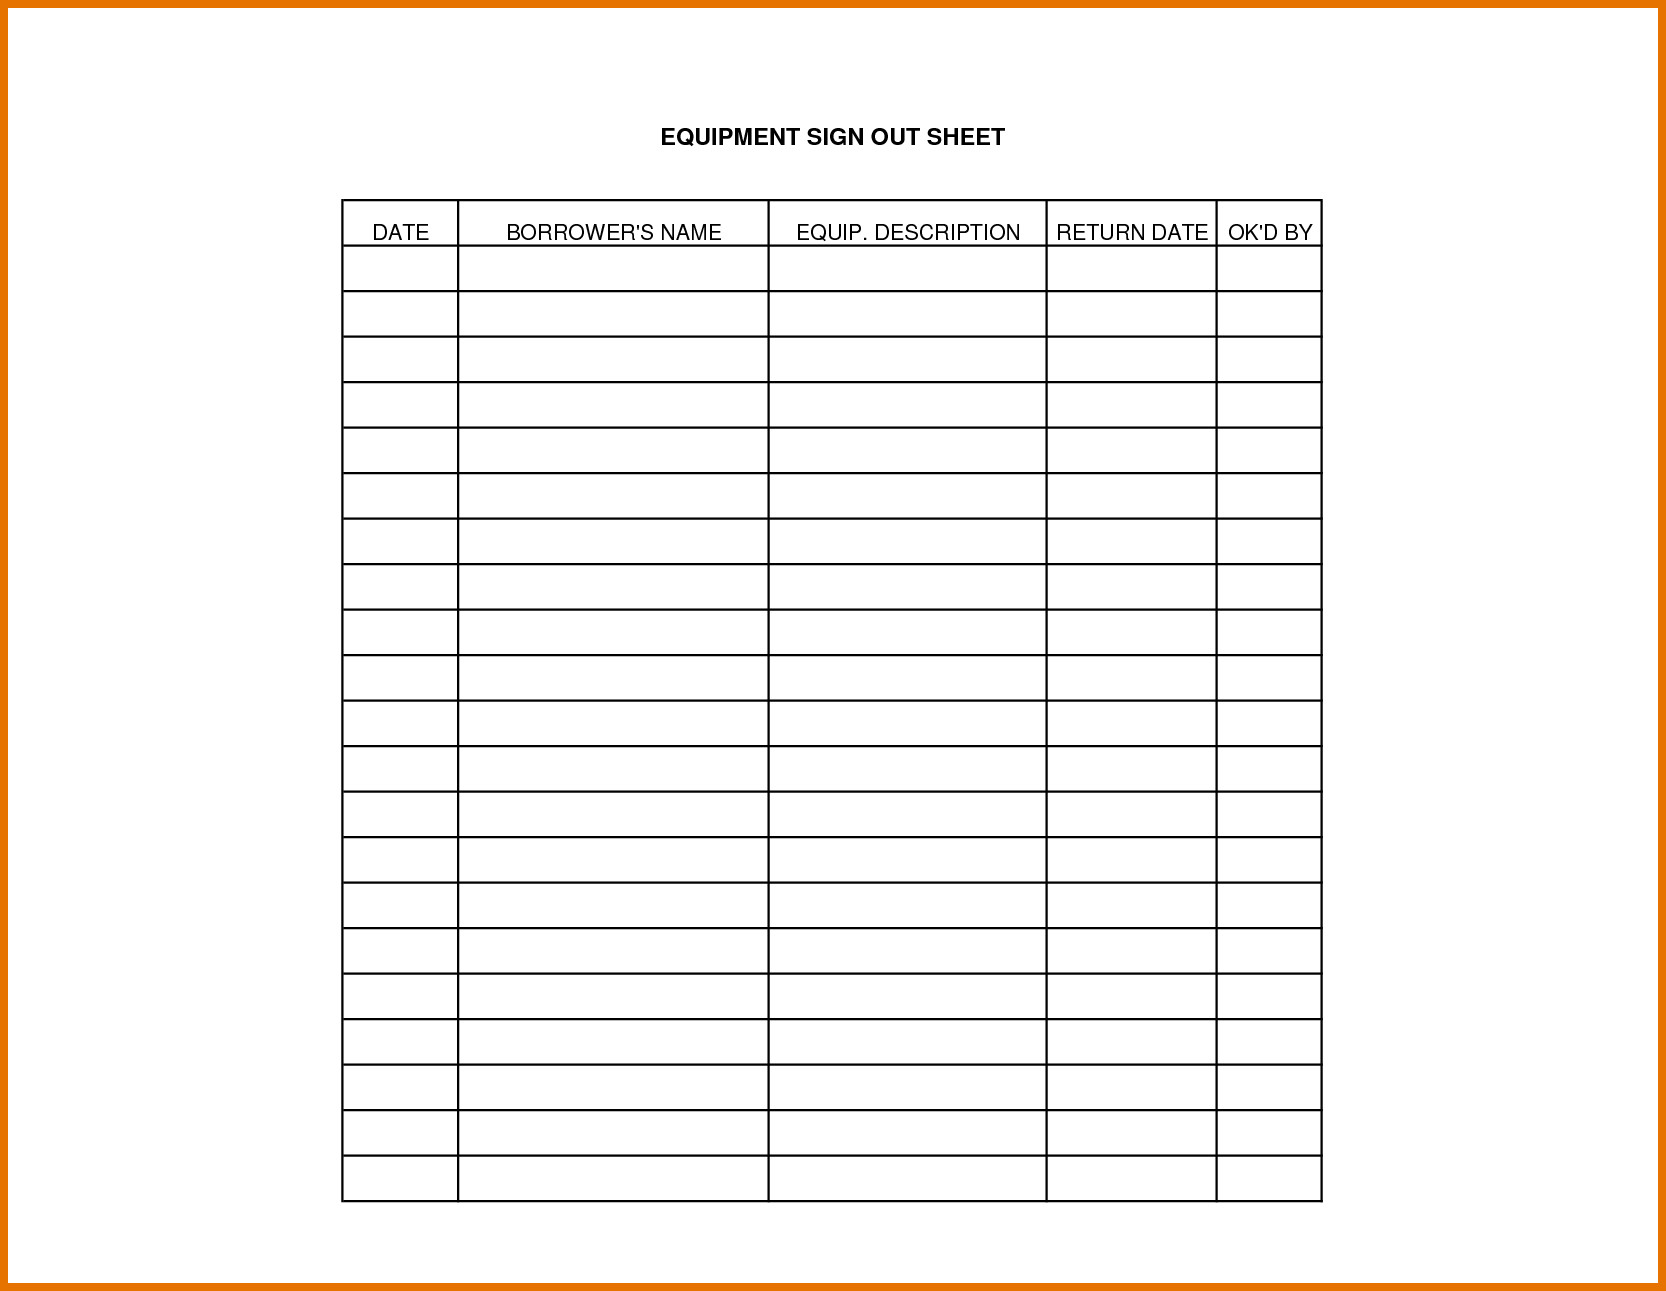 Equipment Sign Out Sheet Template Projects to Try